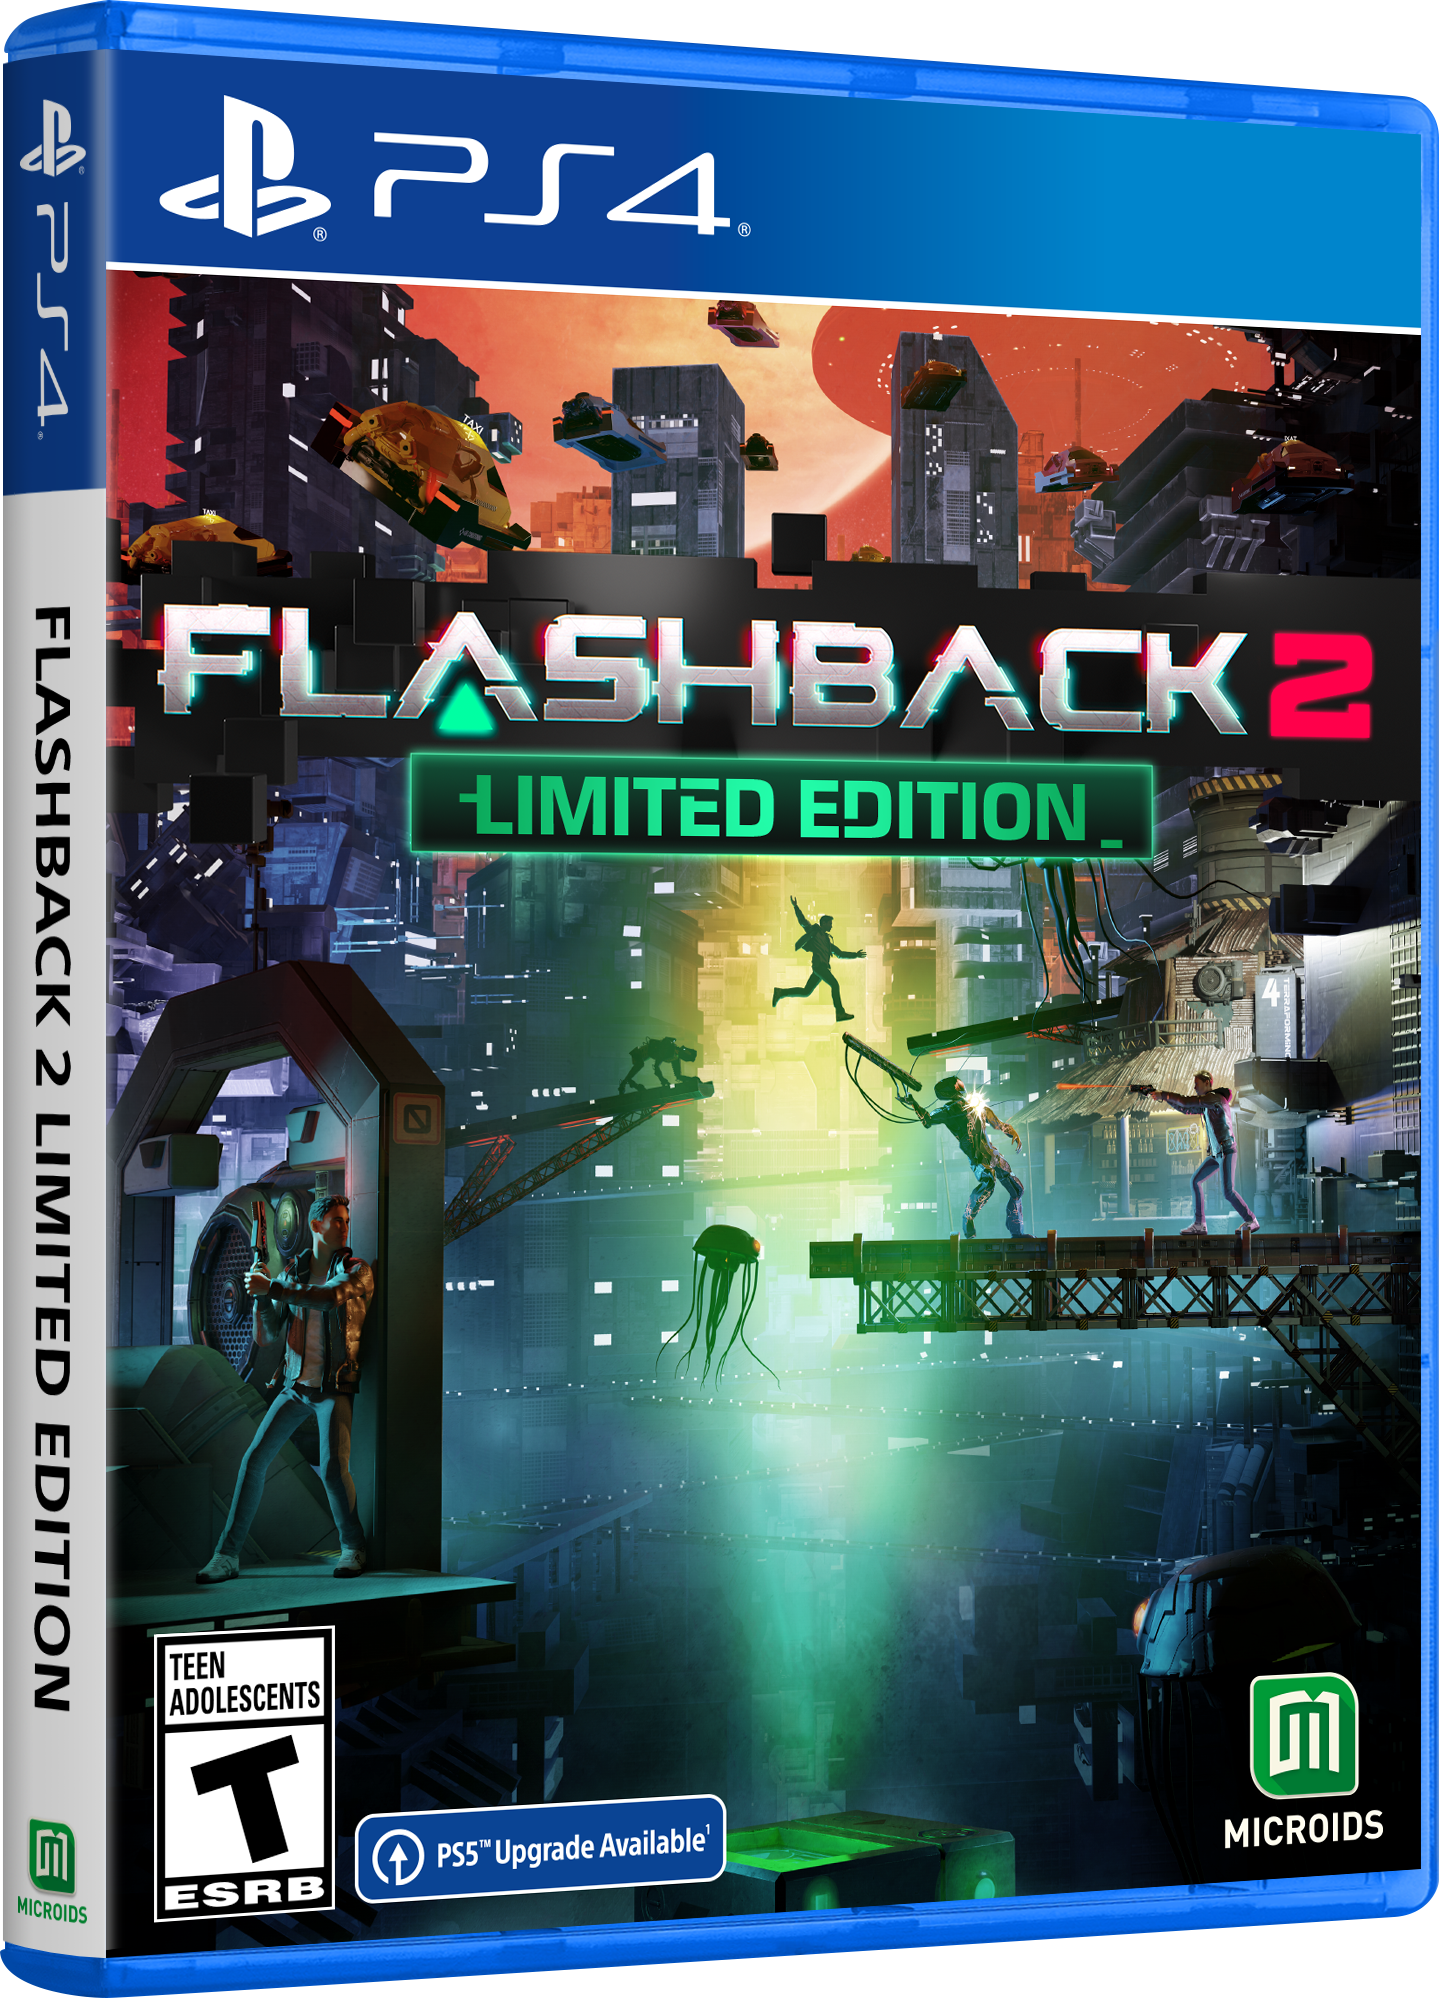 Flashback 2 Coming Soon - Epic Games Store